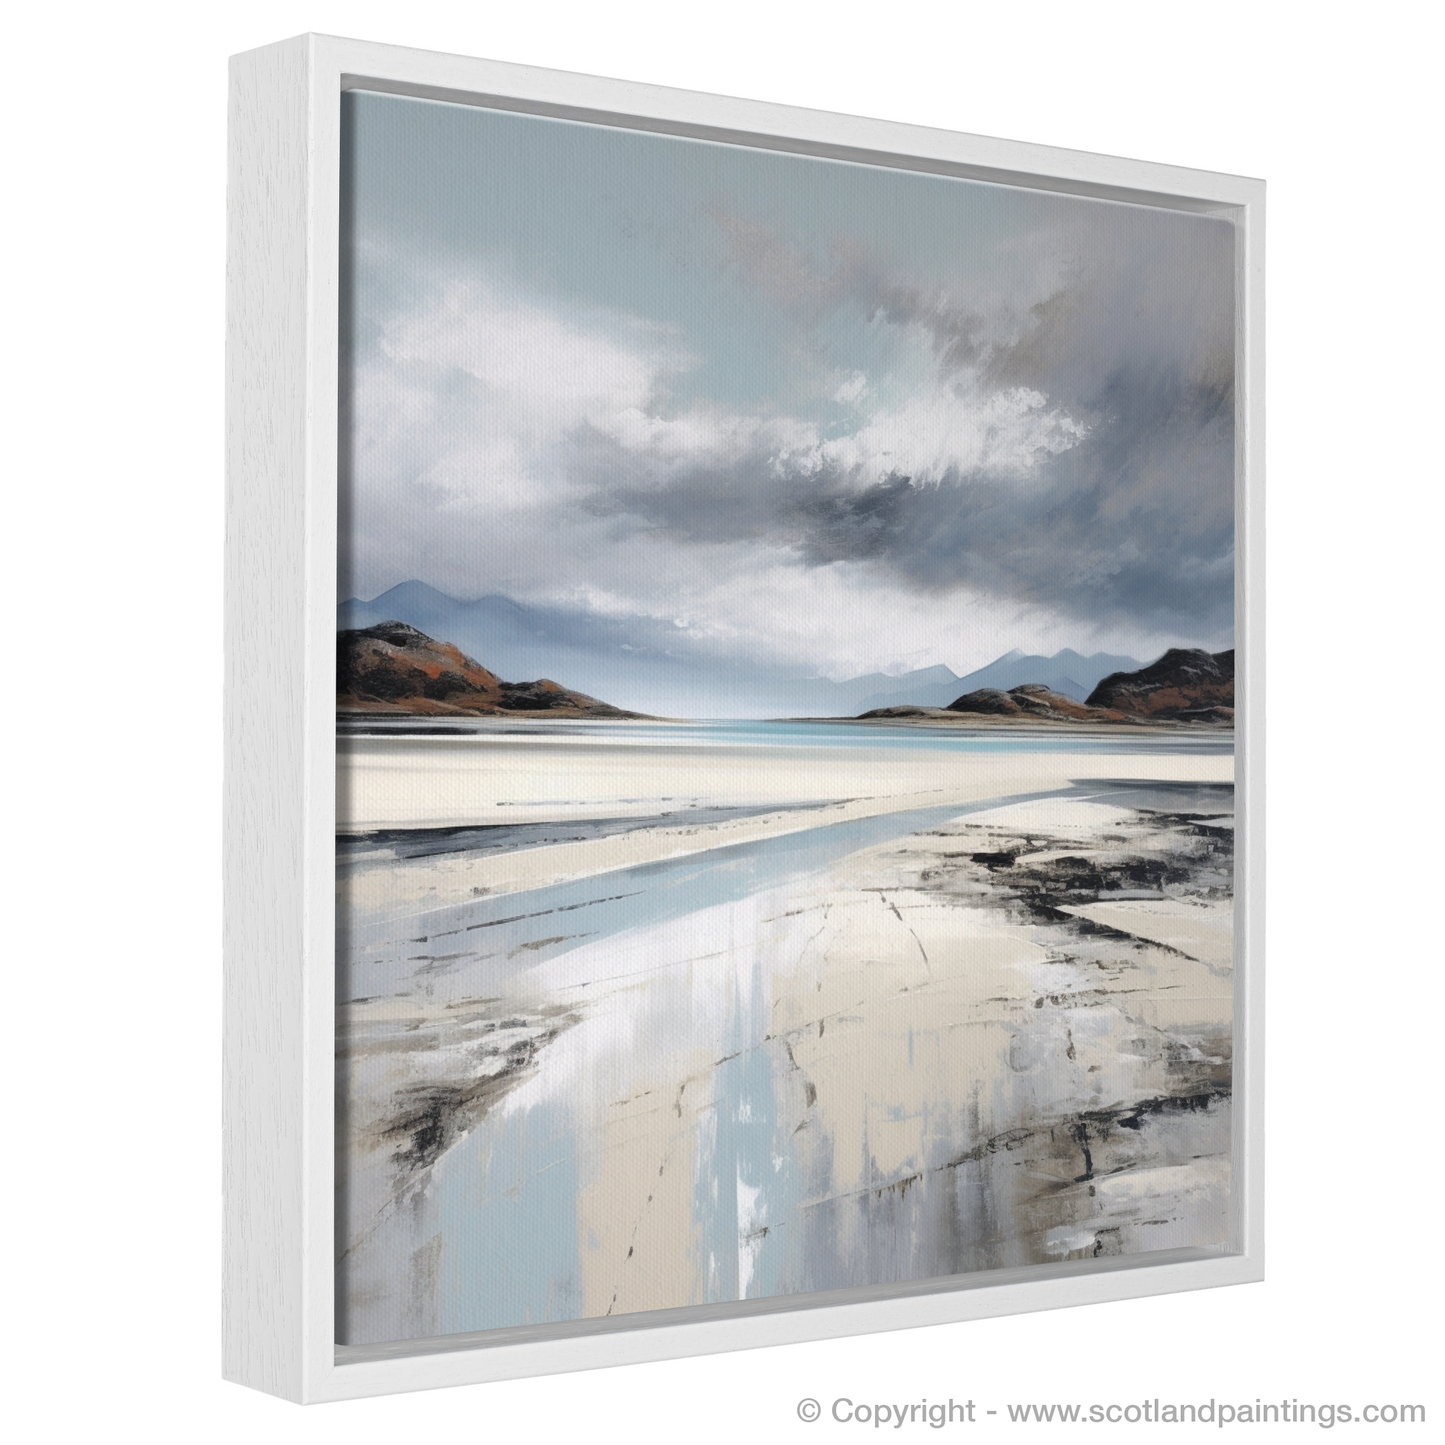 Storm over Silver Sands of Morar: A Minimalist Tribute to the Scottish Coast